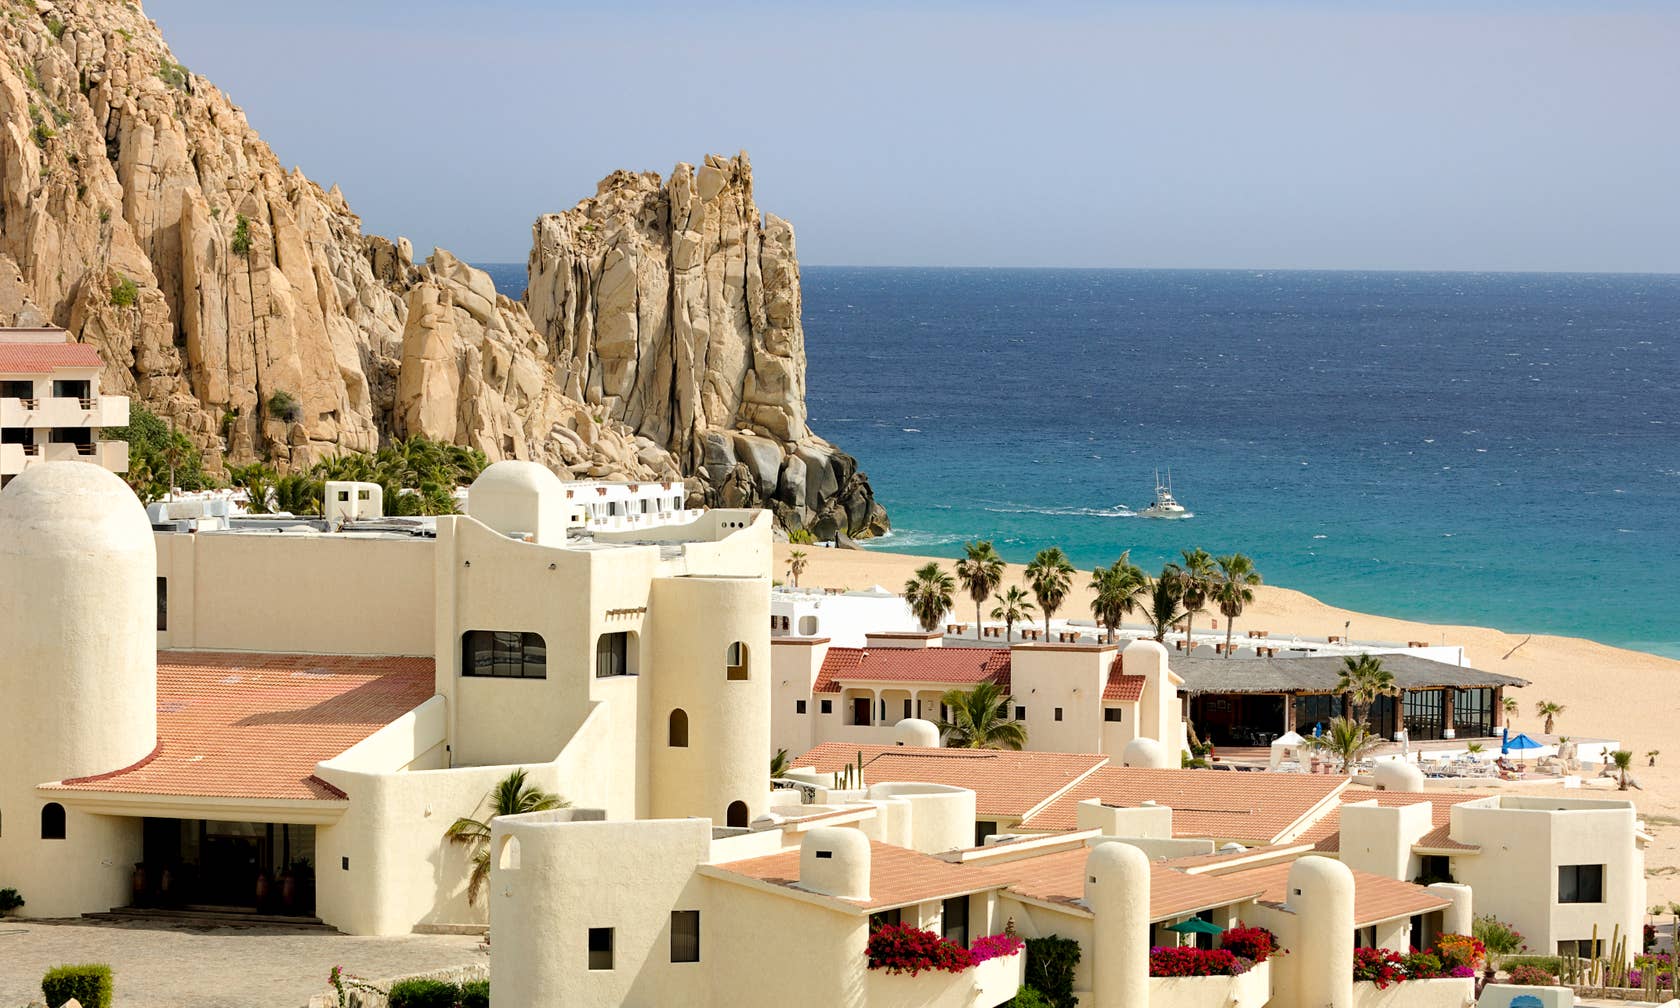 Vacation rental apartments in Cabo San Lucas